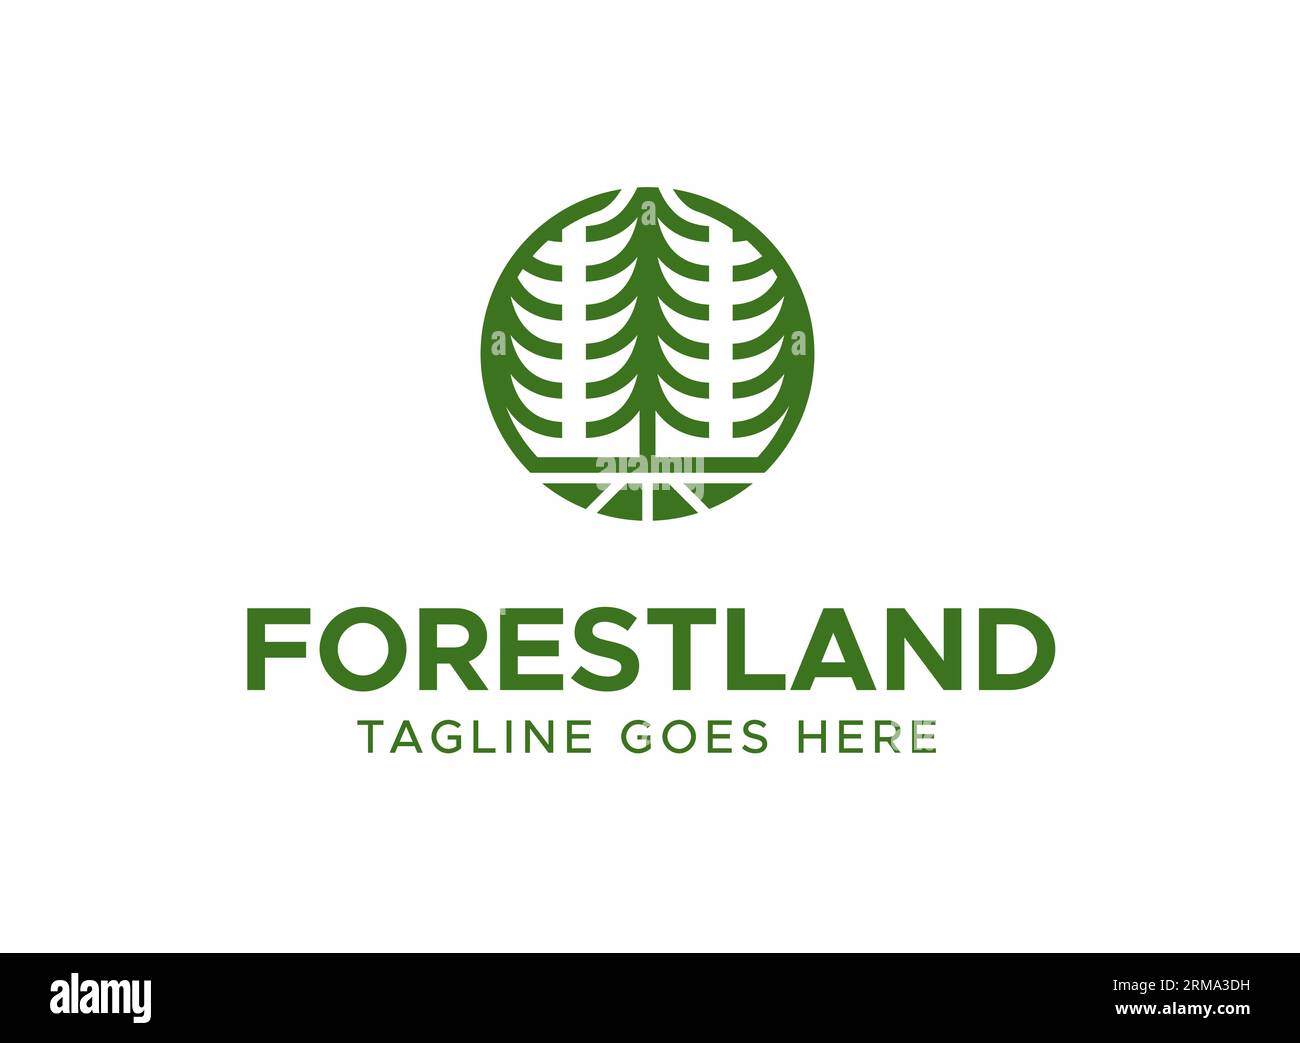 Looking for a logo that embodies the spirit of the great outdoors? Look no further than our Forest Land Pine Tree Outdoor Logo! Featuring a sleek Stock Vector